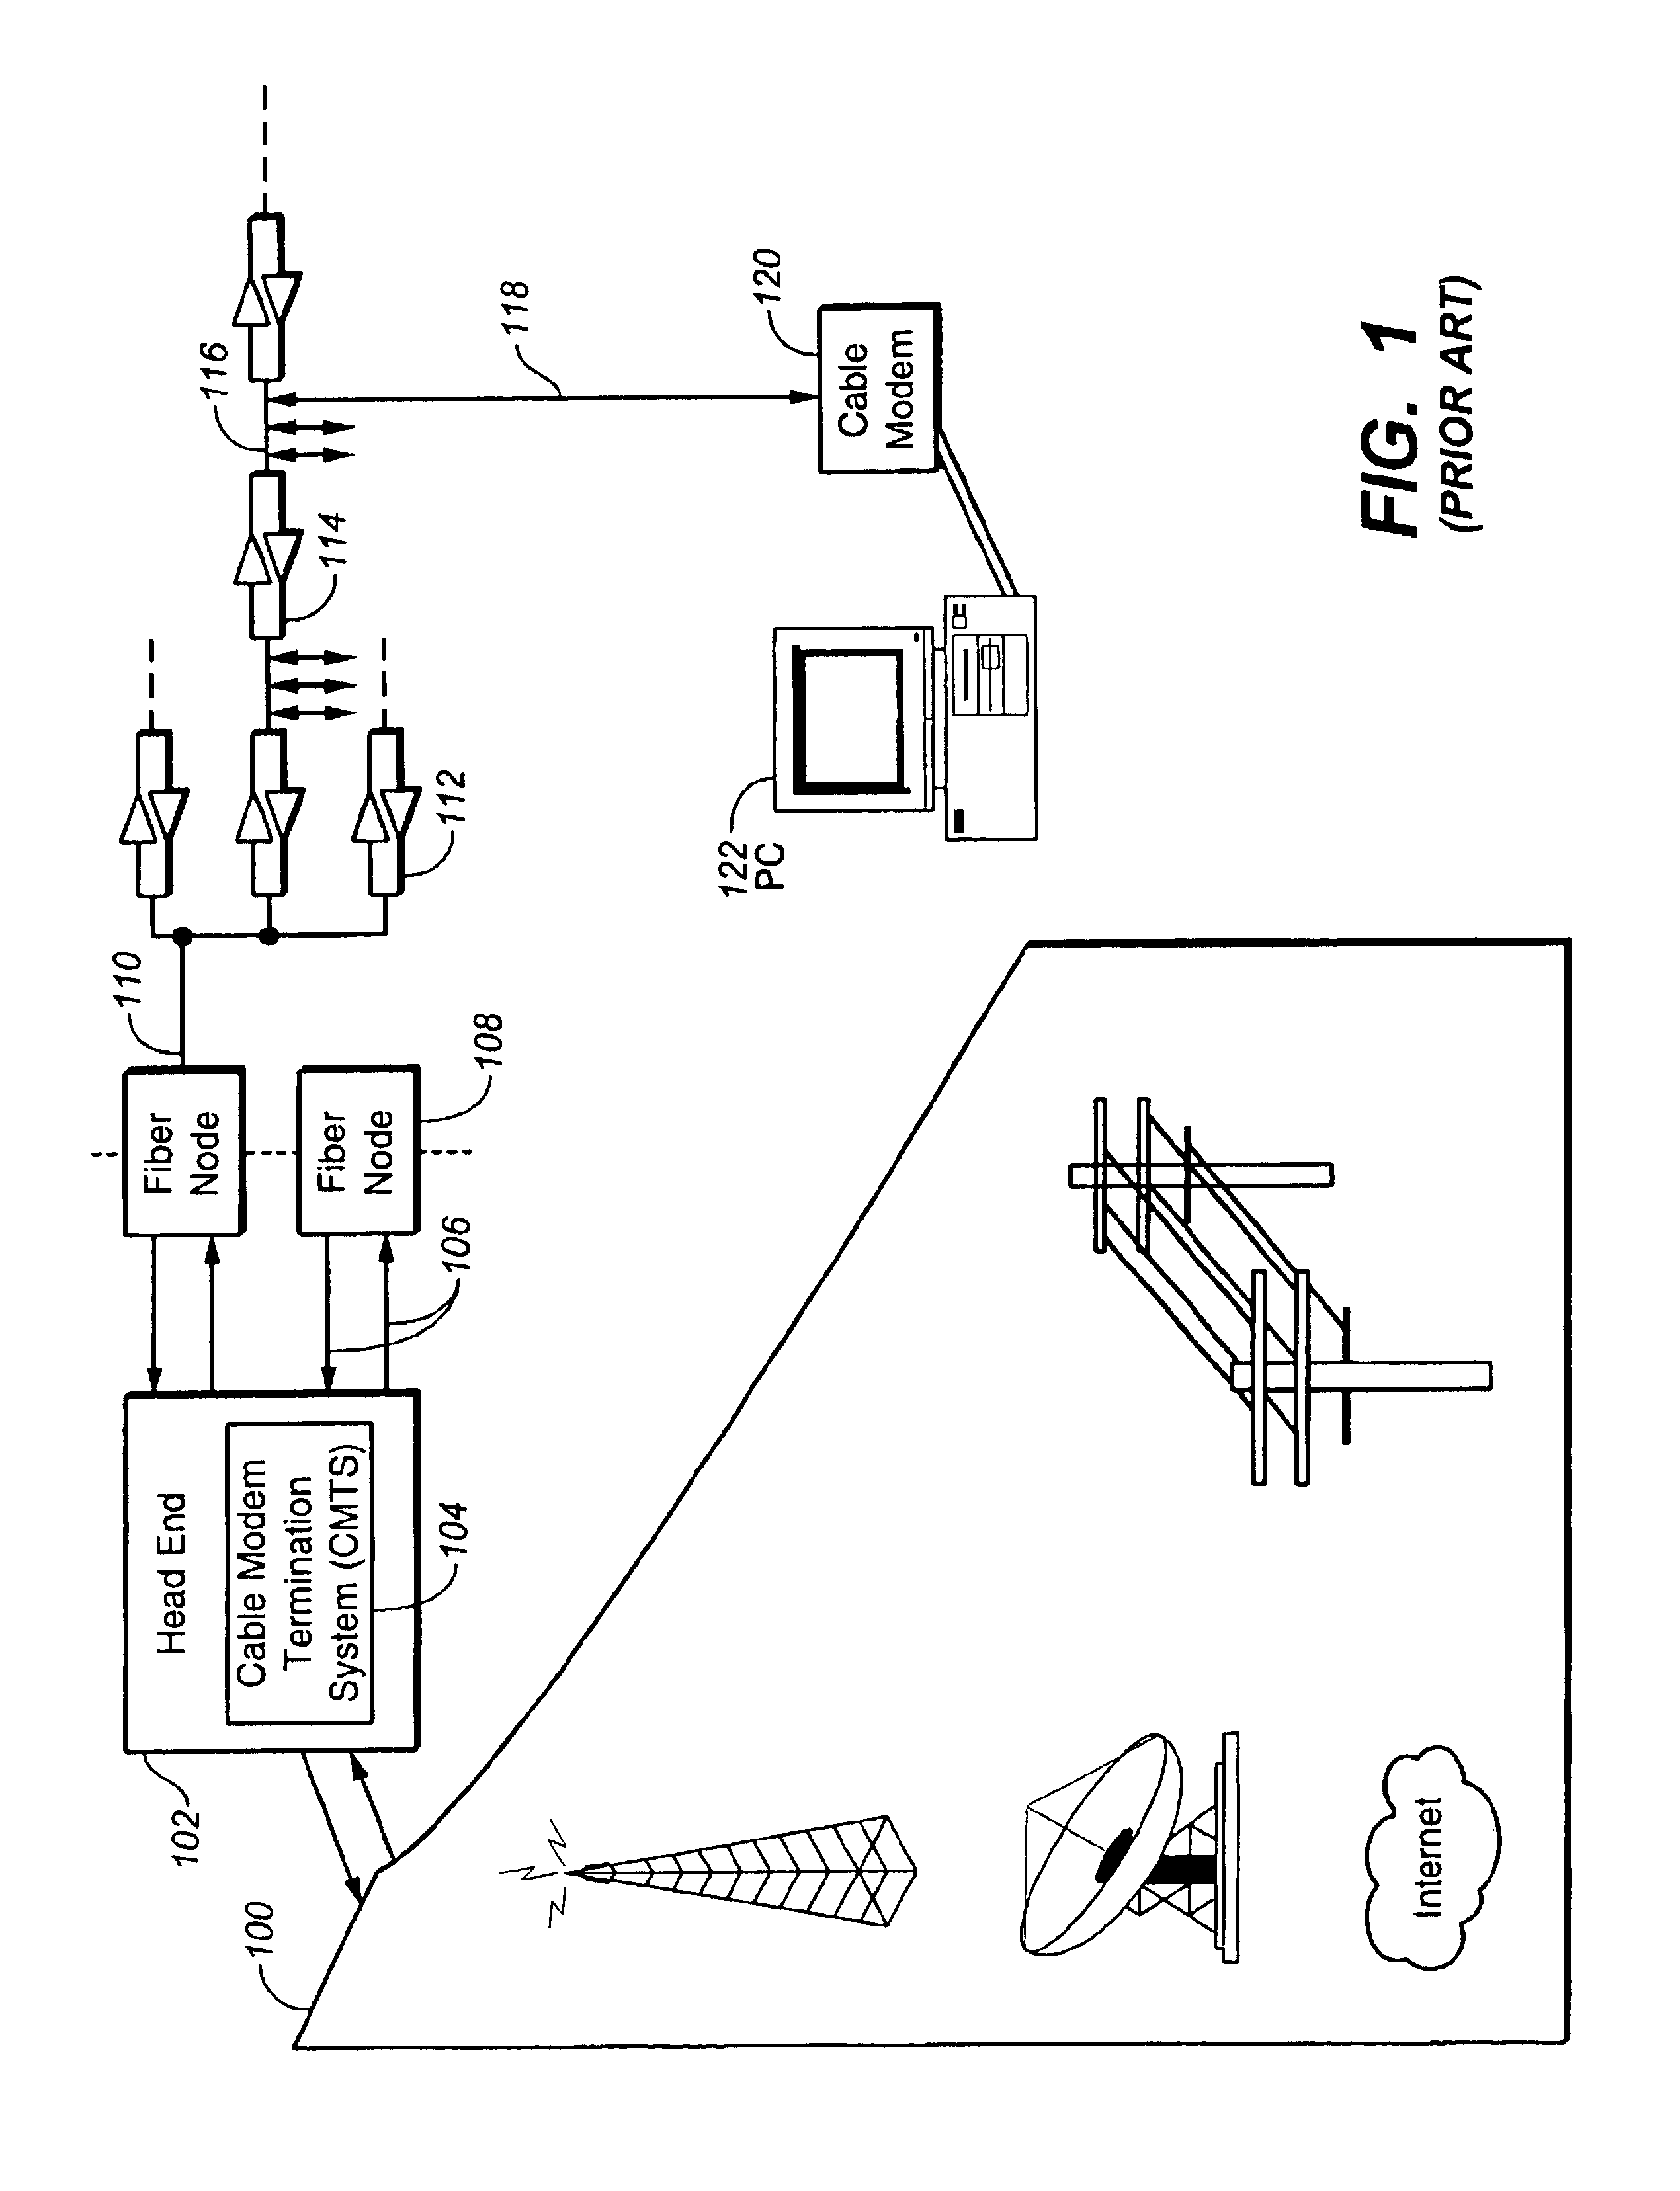 Method and apparatus for measuring quality of upstream signal transmission of a cable modem